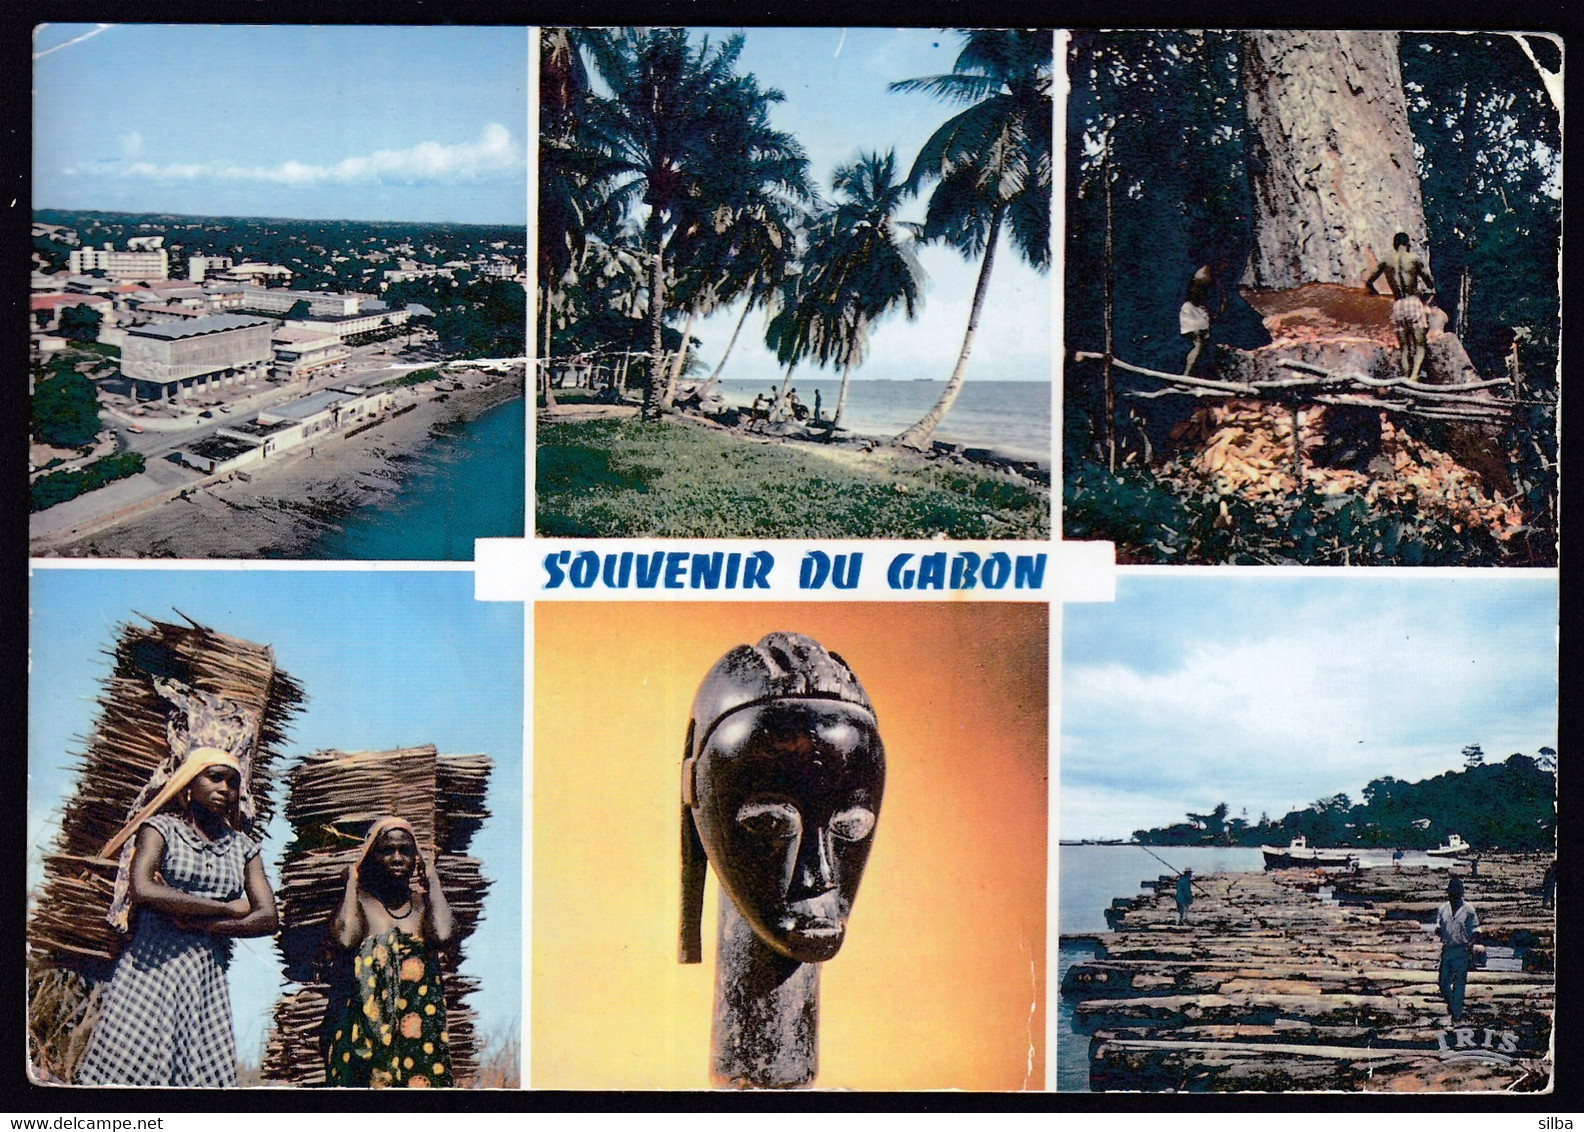 Gabon 1968 / Libreville, Bord, Abattage, Porteuses, Masque Fang, Ovendo, Timber Carriers, Fang Mask, Timber Floating - Gabon